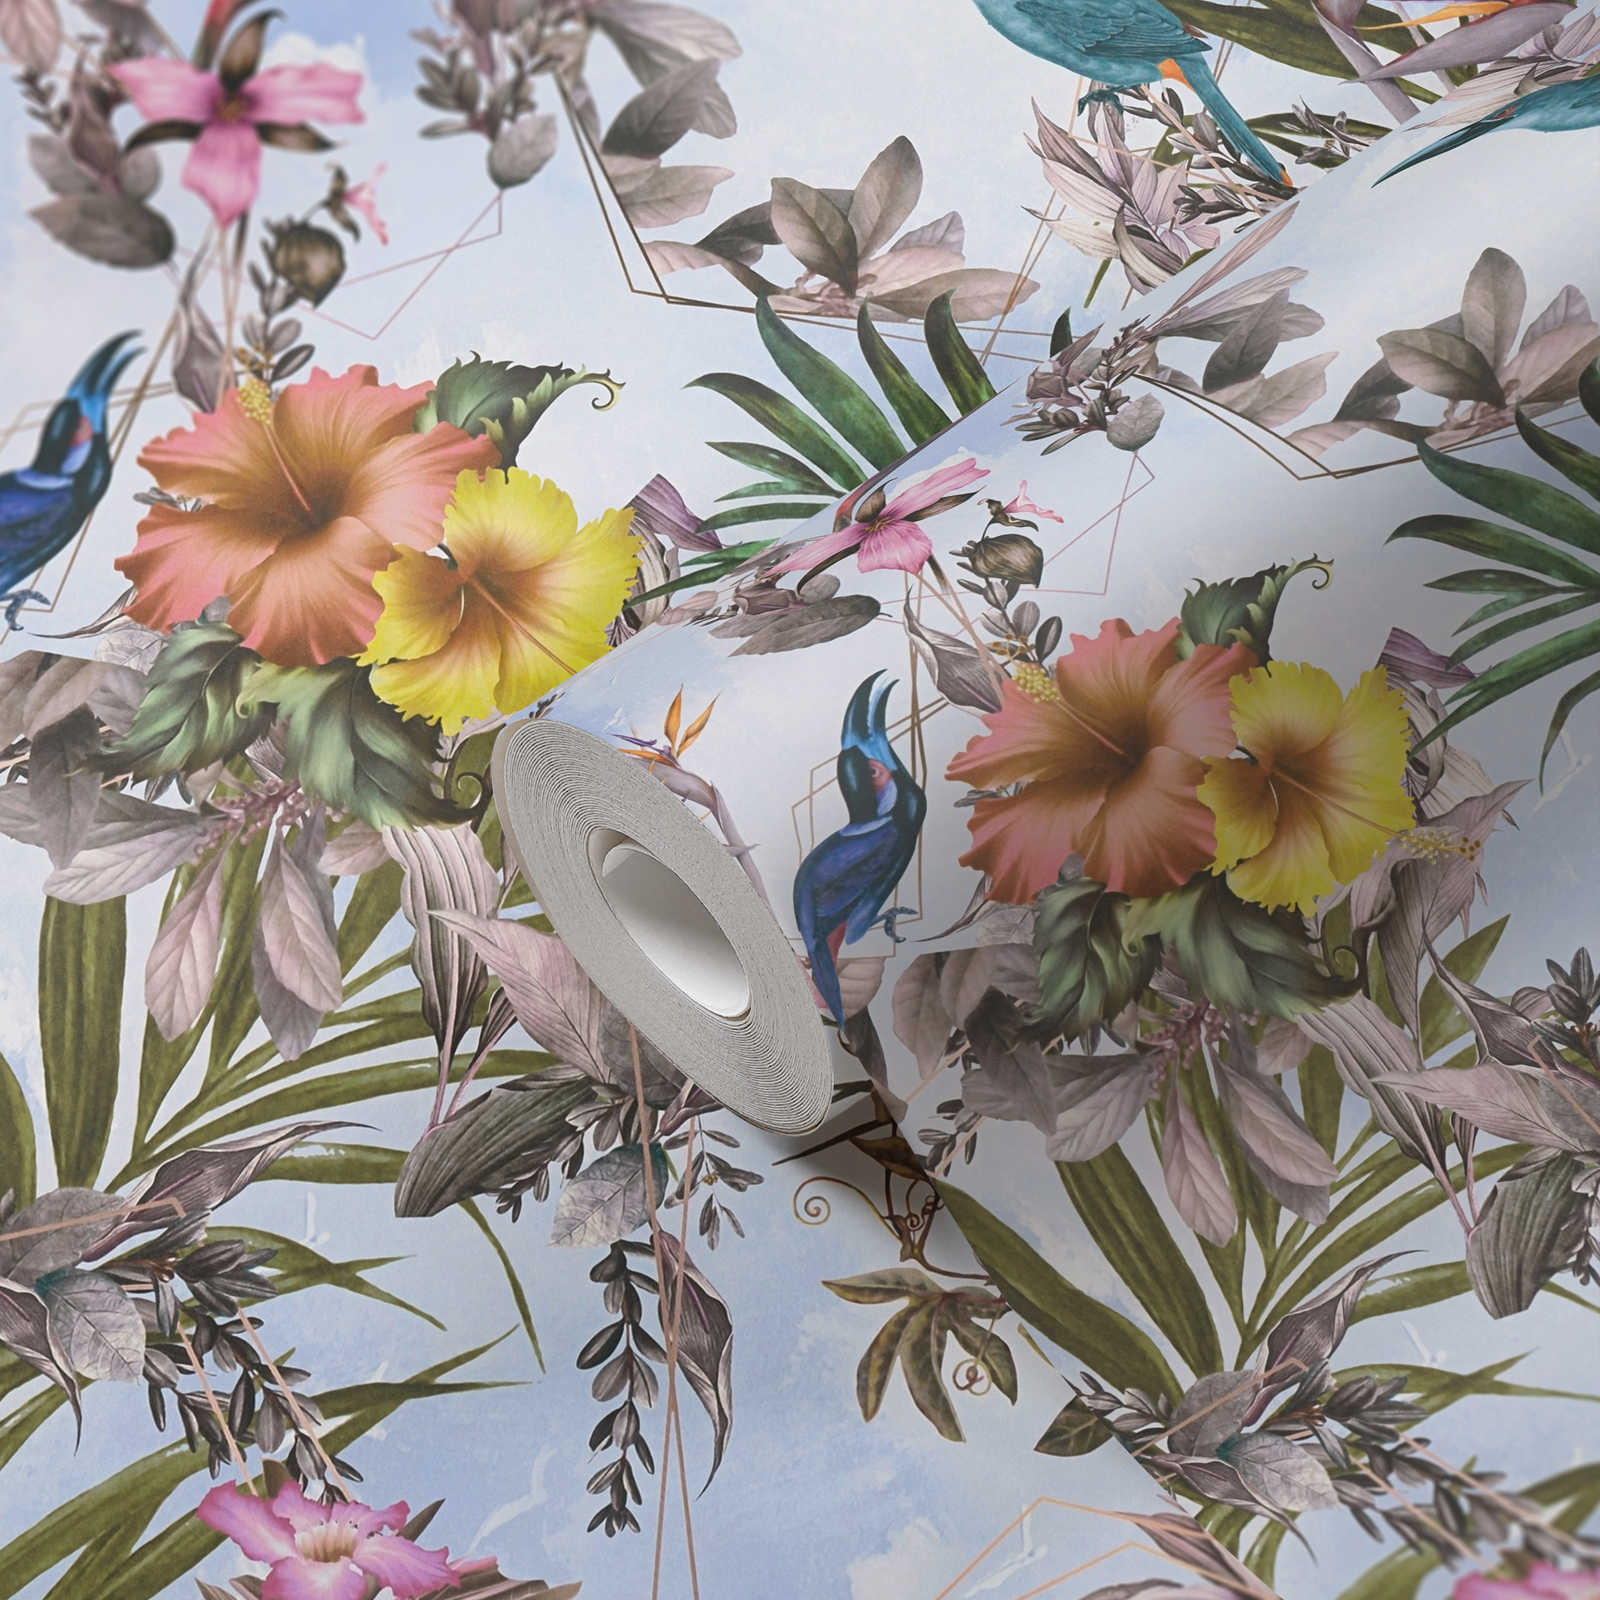             Floral wallpaper with birds & tropical look - colourful, blue, green
        